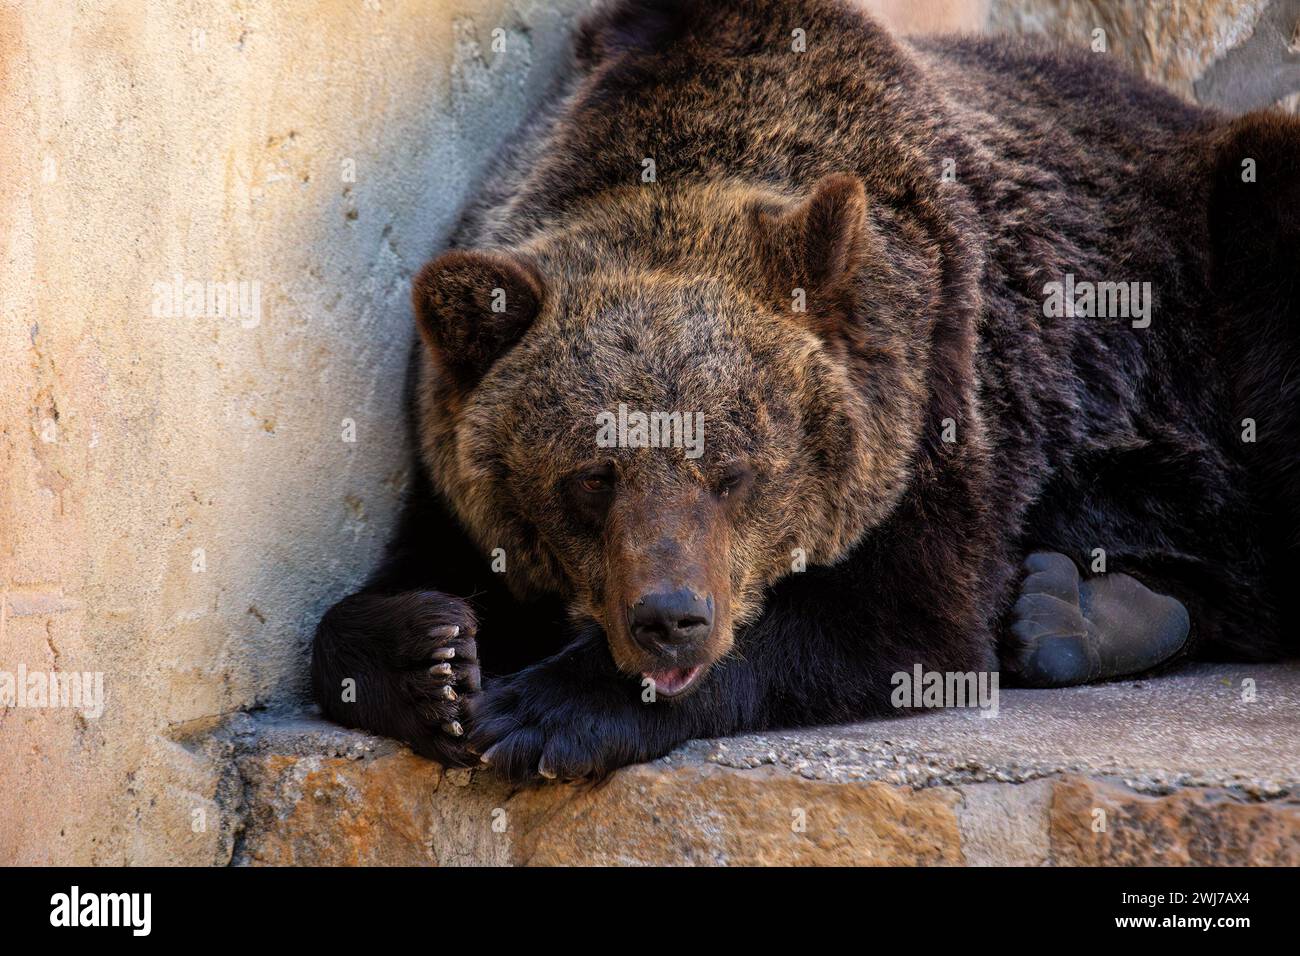 The Brown Bear (Ursus arctos) is a large carnivore found across Eurasia and North America, recognized for its immense size and powerful presence. Stock Photo